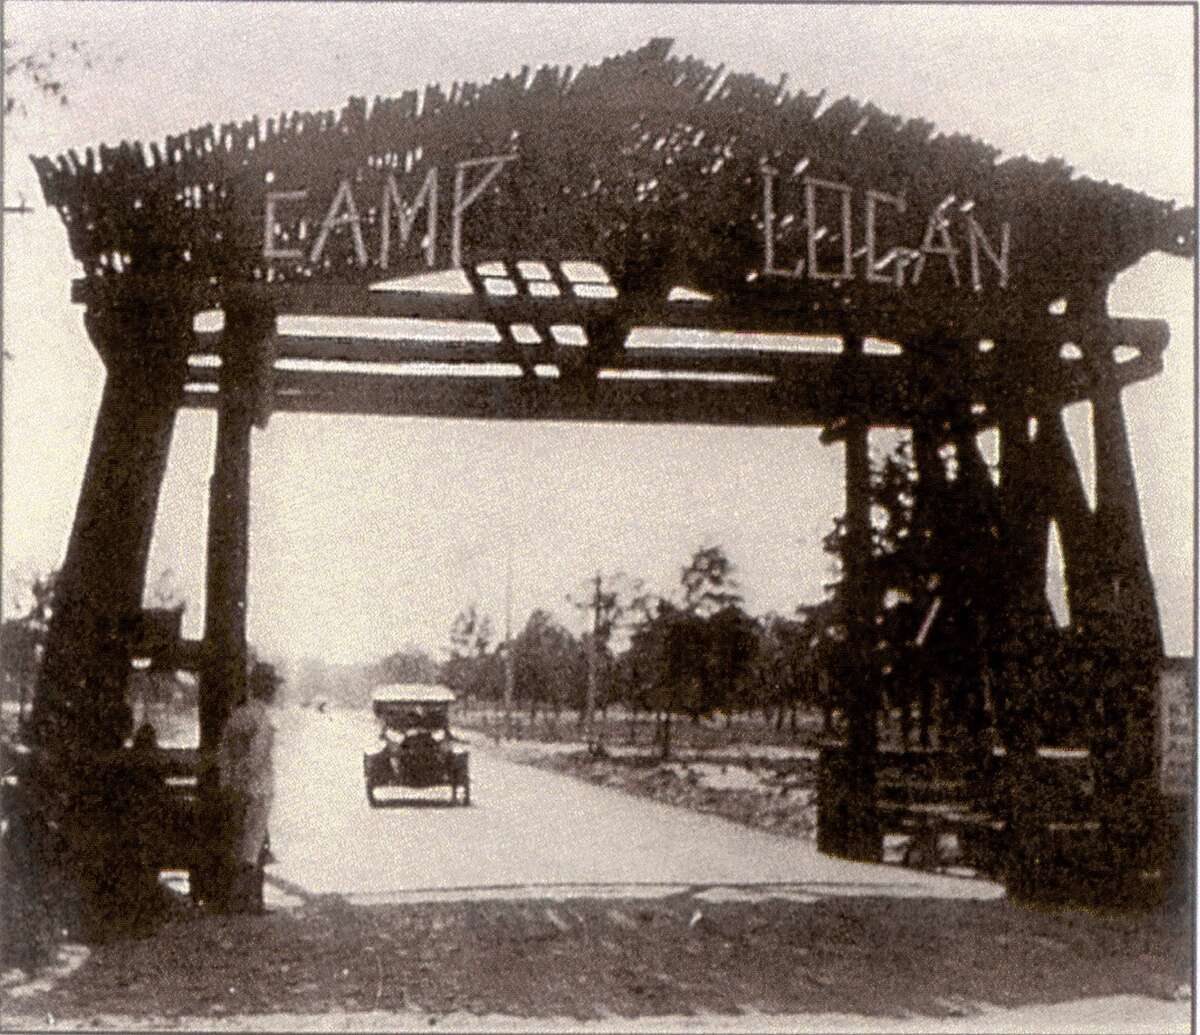 Camp Logan, now the site of Memorial Park, was built in 1917 as the U.S. entered World War I.